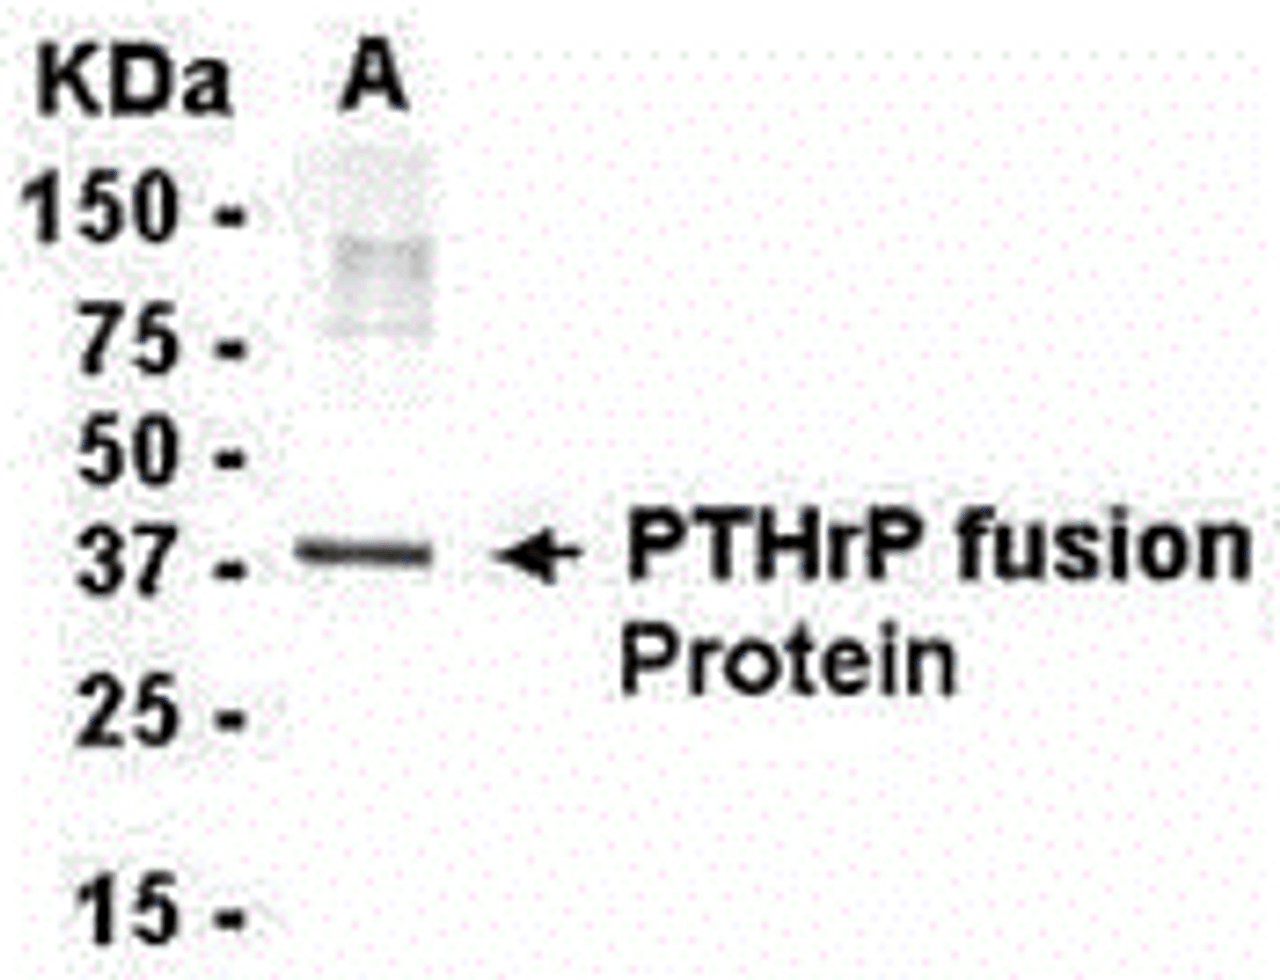 E coli-derived fusion protein as test antigen. Affinity-Purified IgY dilution: 1:2000, Goat anti-IgY-HRP dilution: 1:1000. Colorimetric method for signal development.